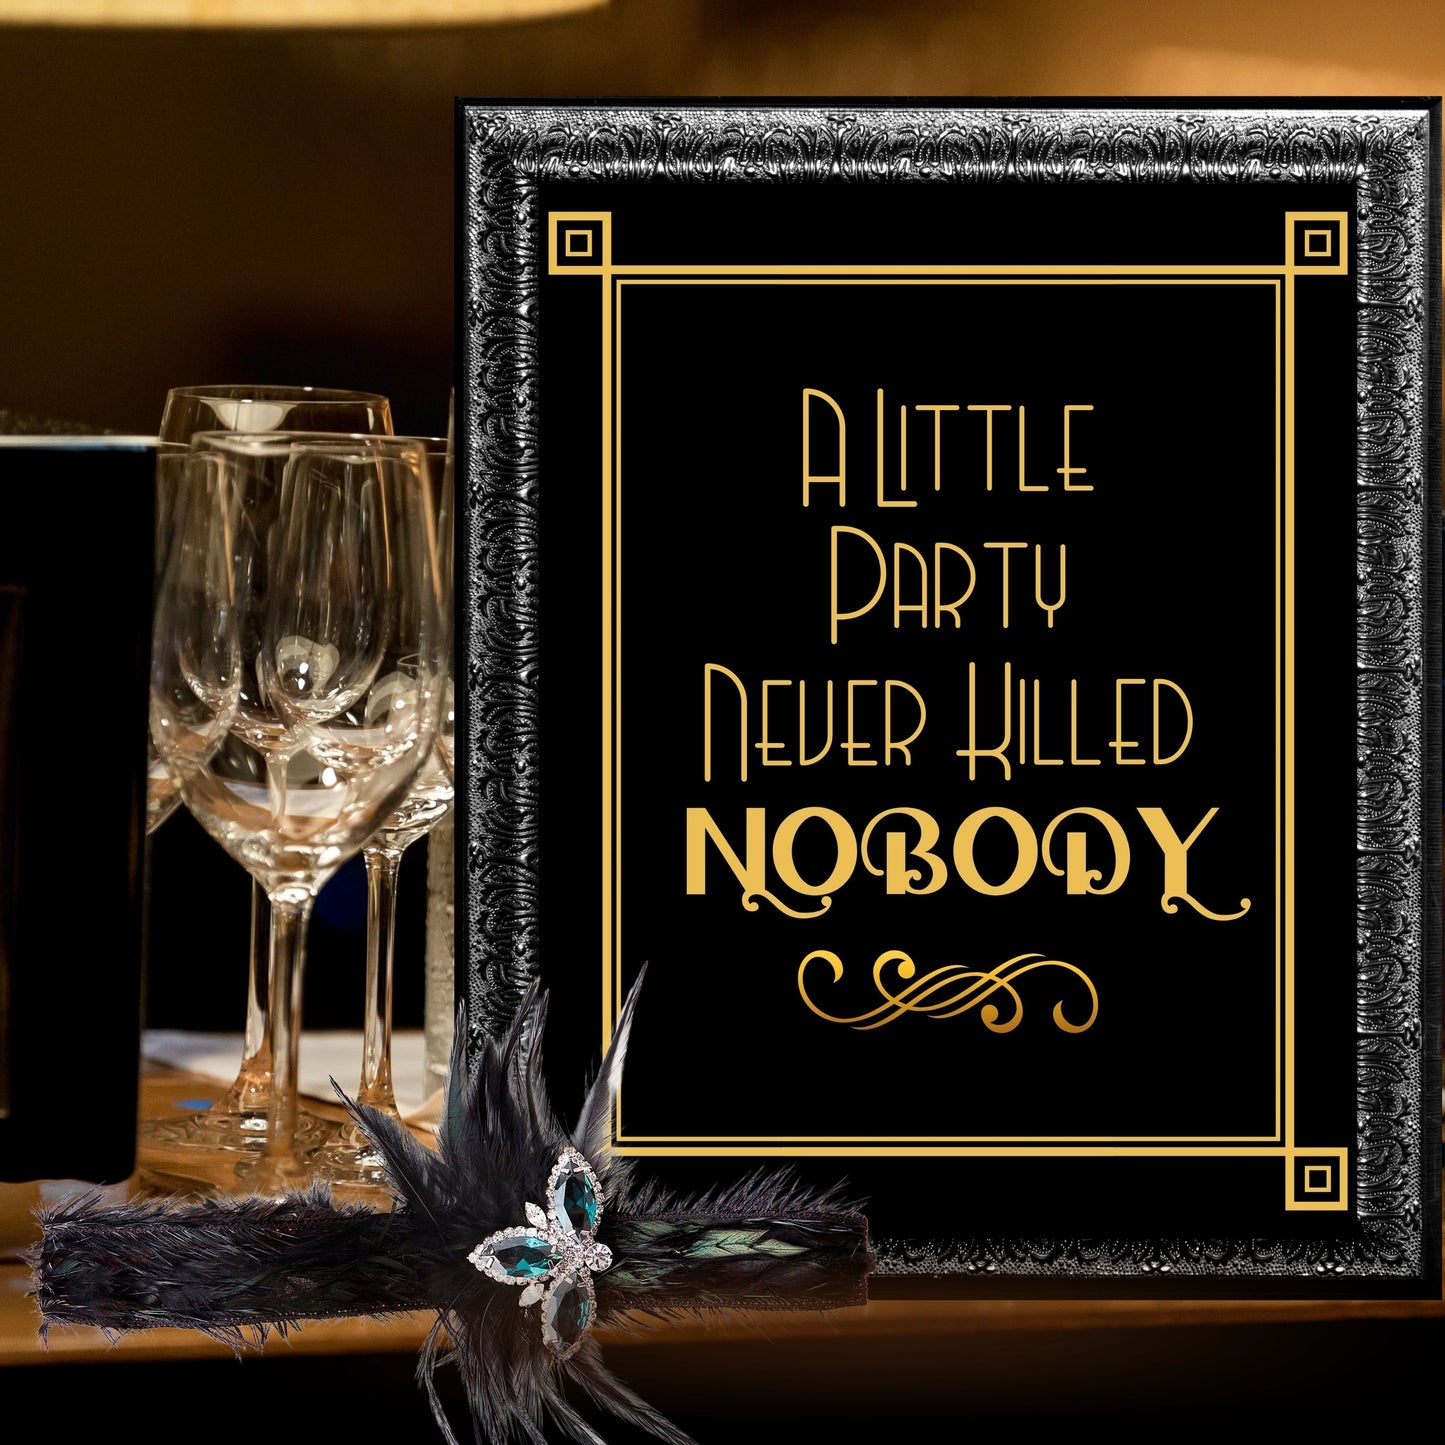 "A Little Party Never Killed Nobody" Printable Party Sign For Great Gatsby or Roaring 20's Party Or Wedding, Black & Gold, Printable Party Decor